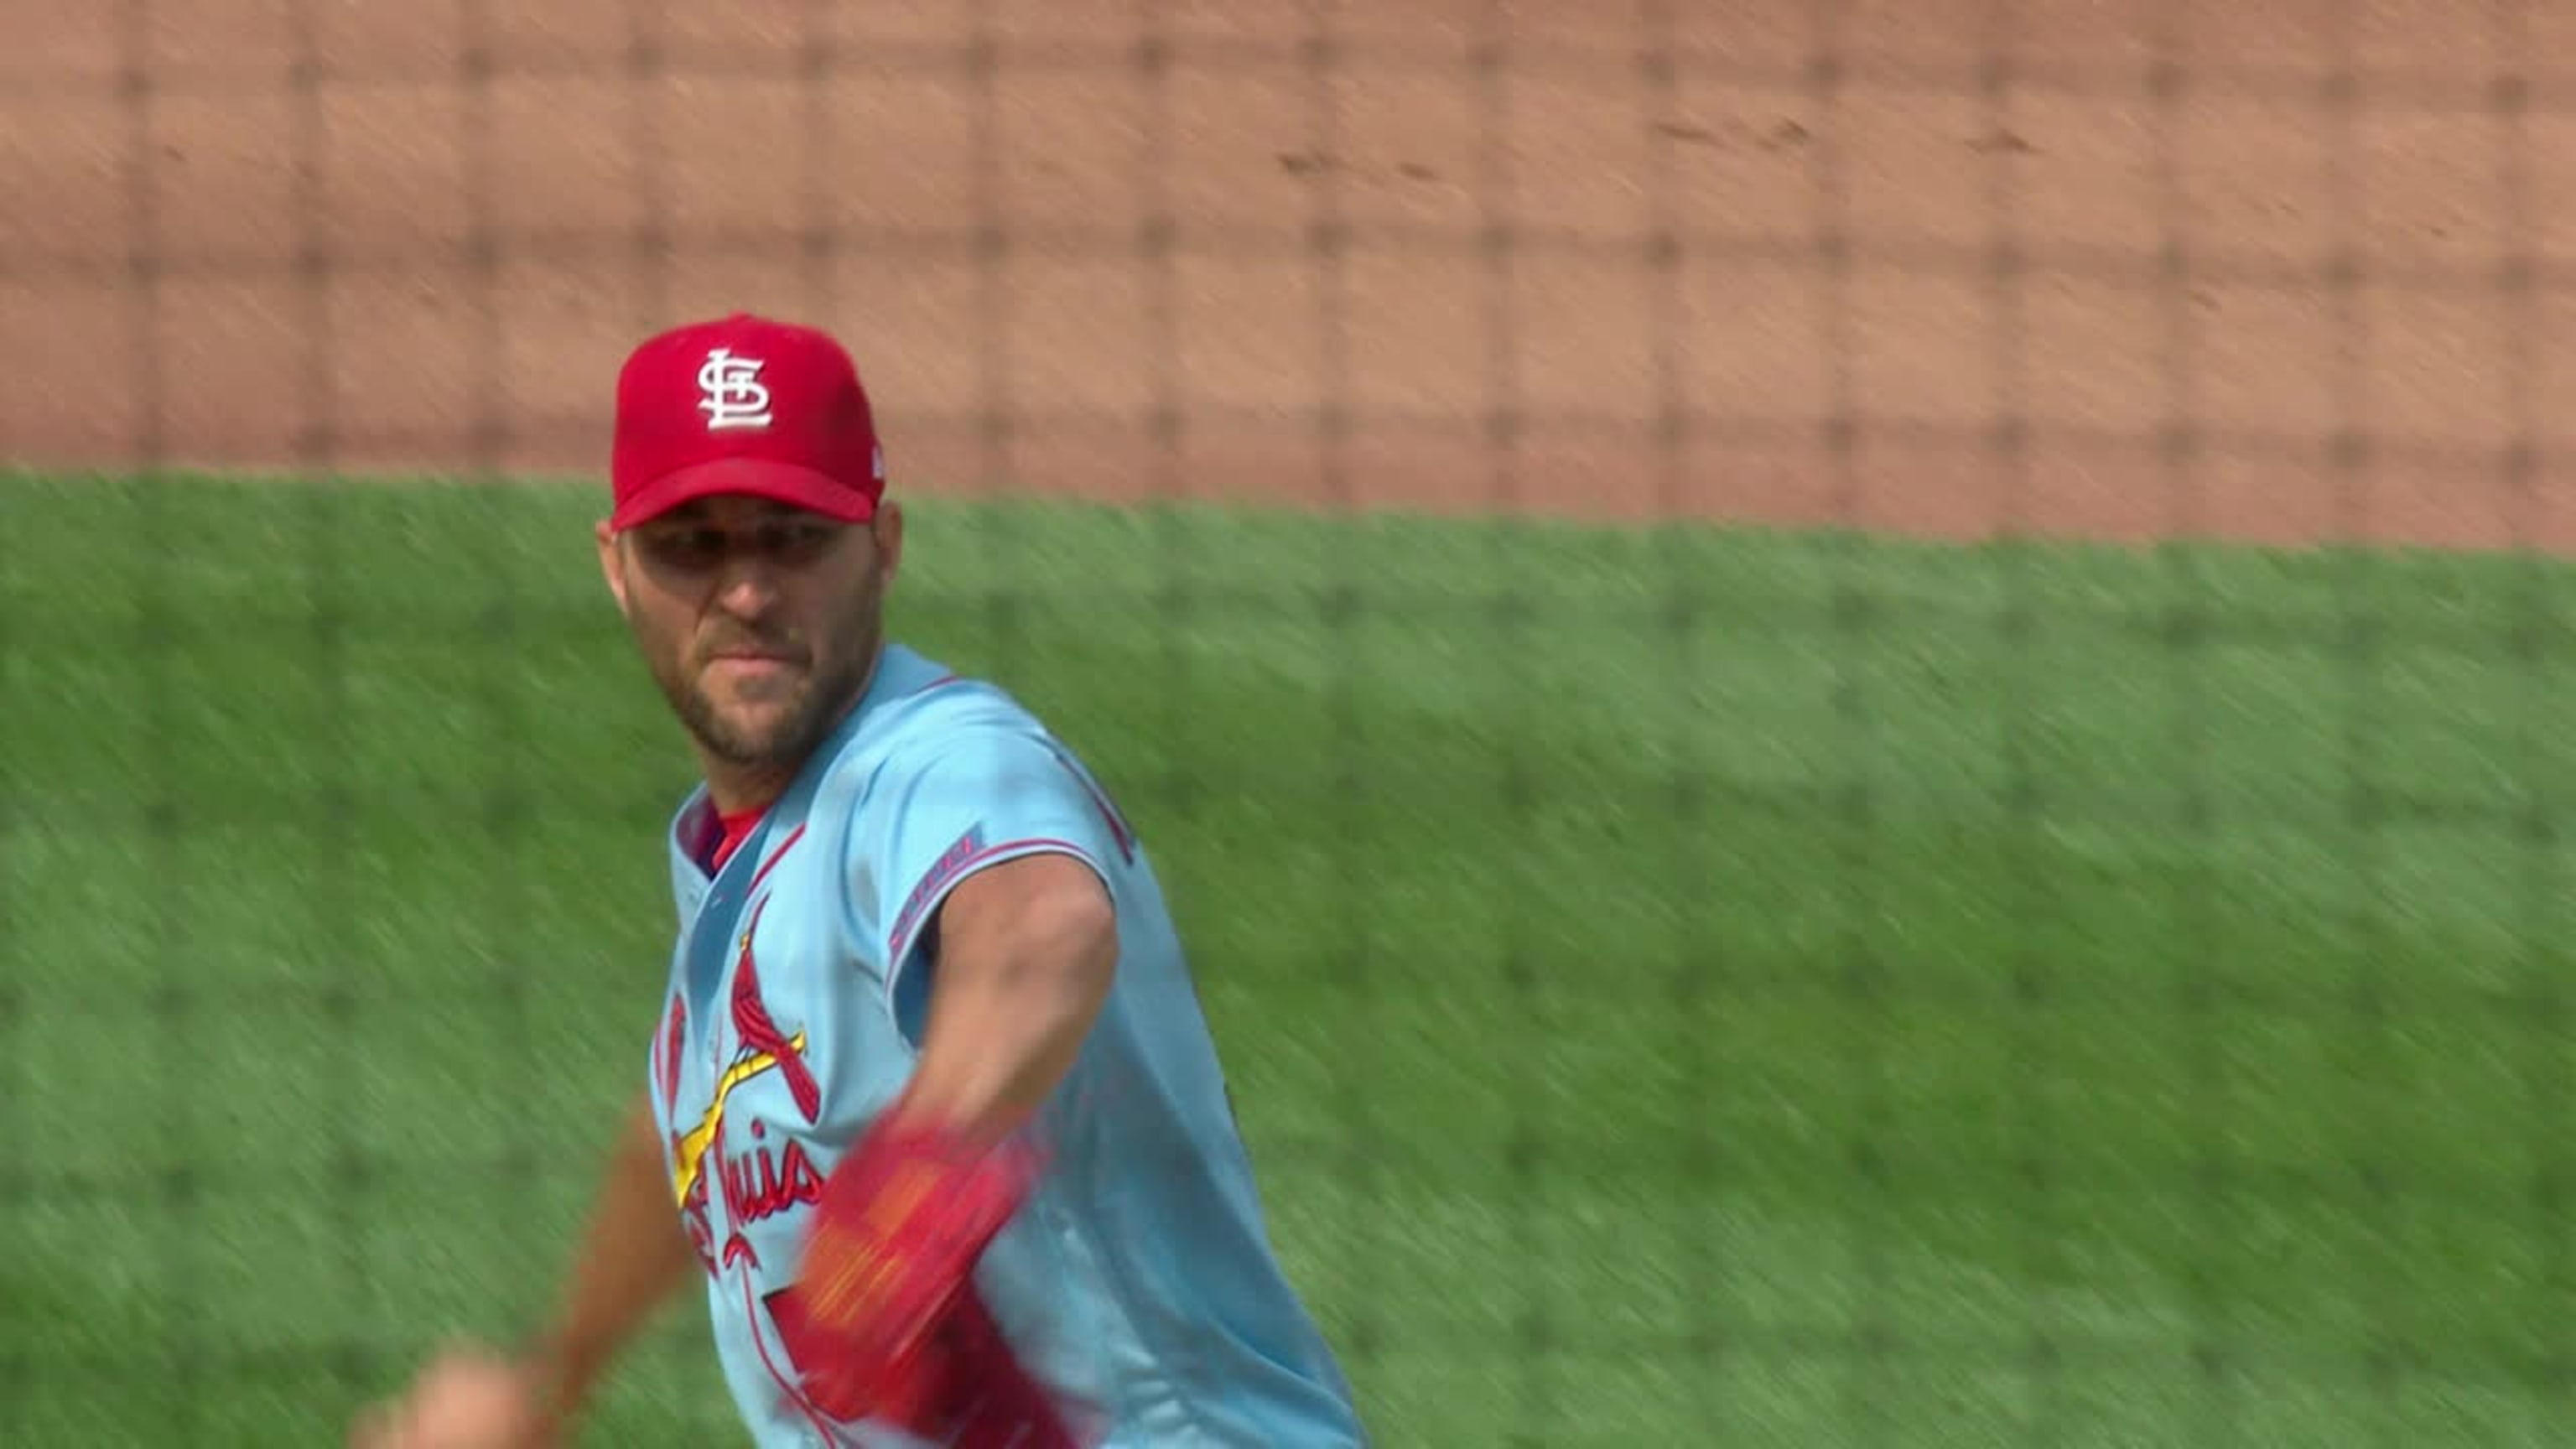 Adam Wainwright's role after return from injury gets shaky update